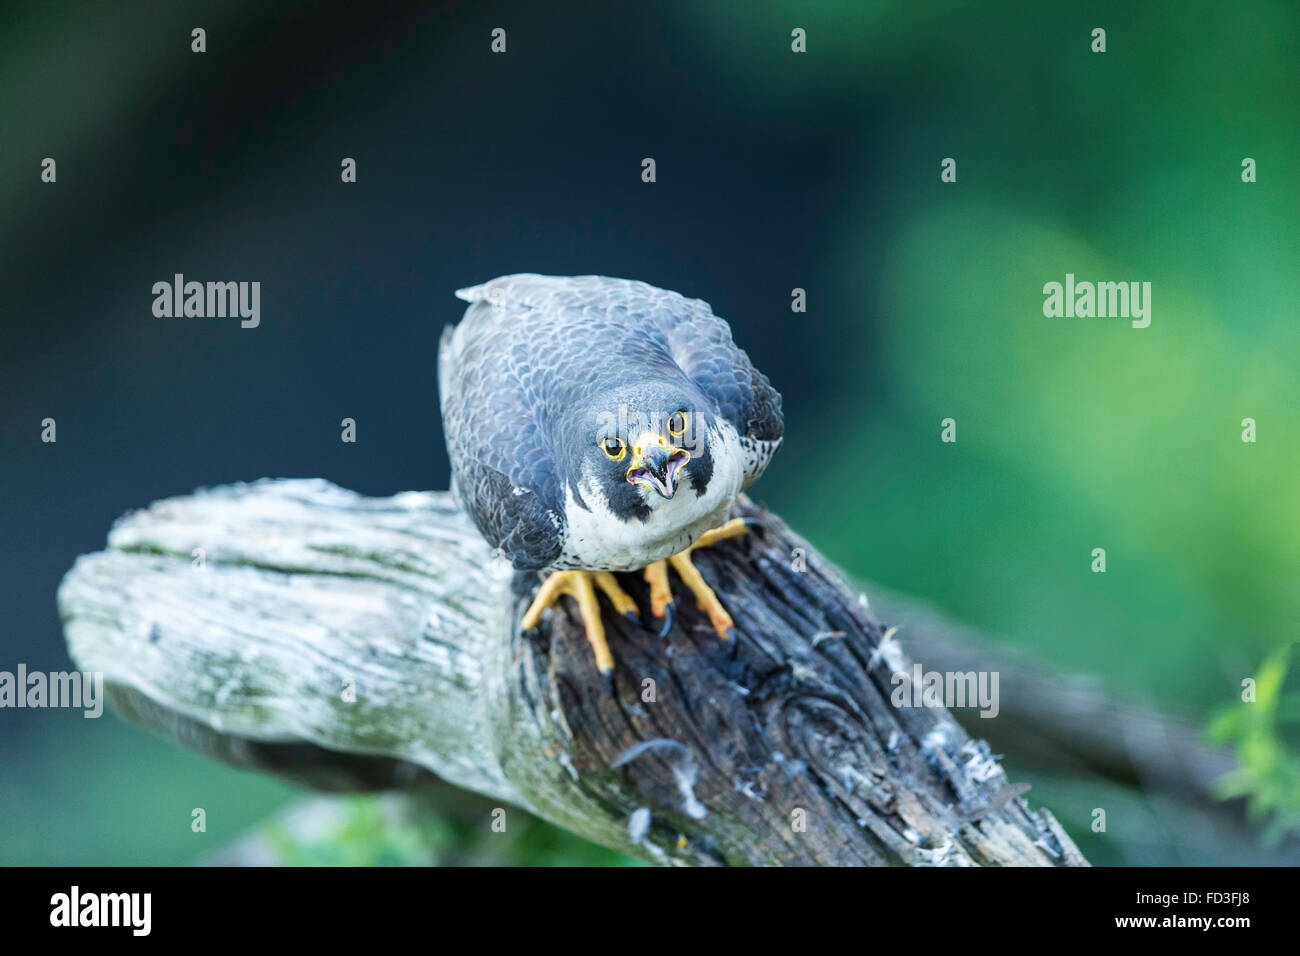 Endangered bird of prey, adult Peregrine Falcon, looking up with opened beak while perched on a weathered tree branch Stock Photo